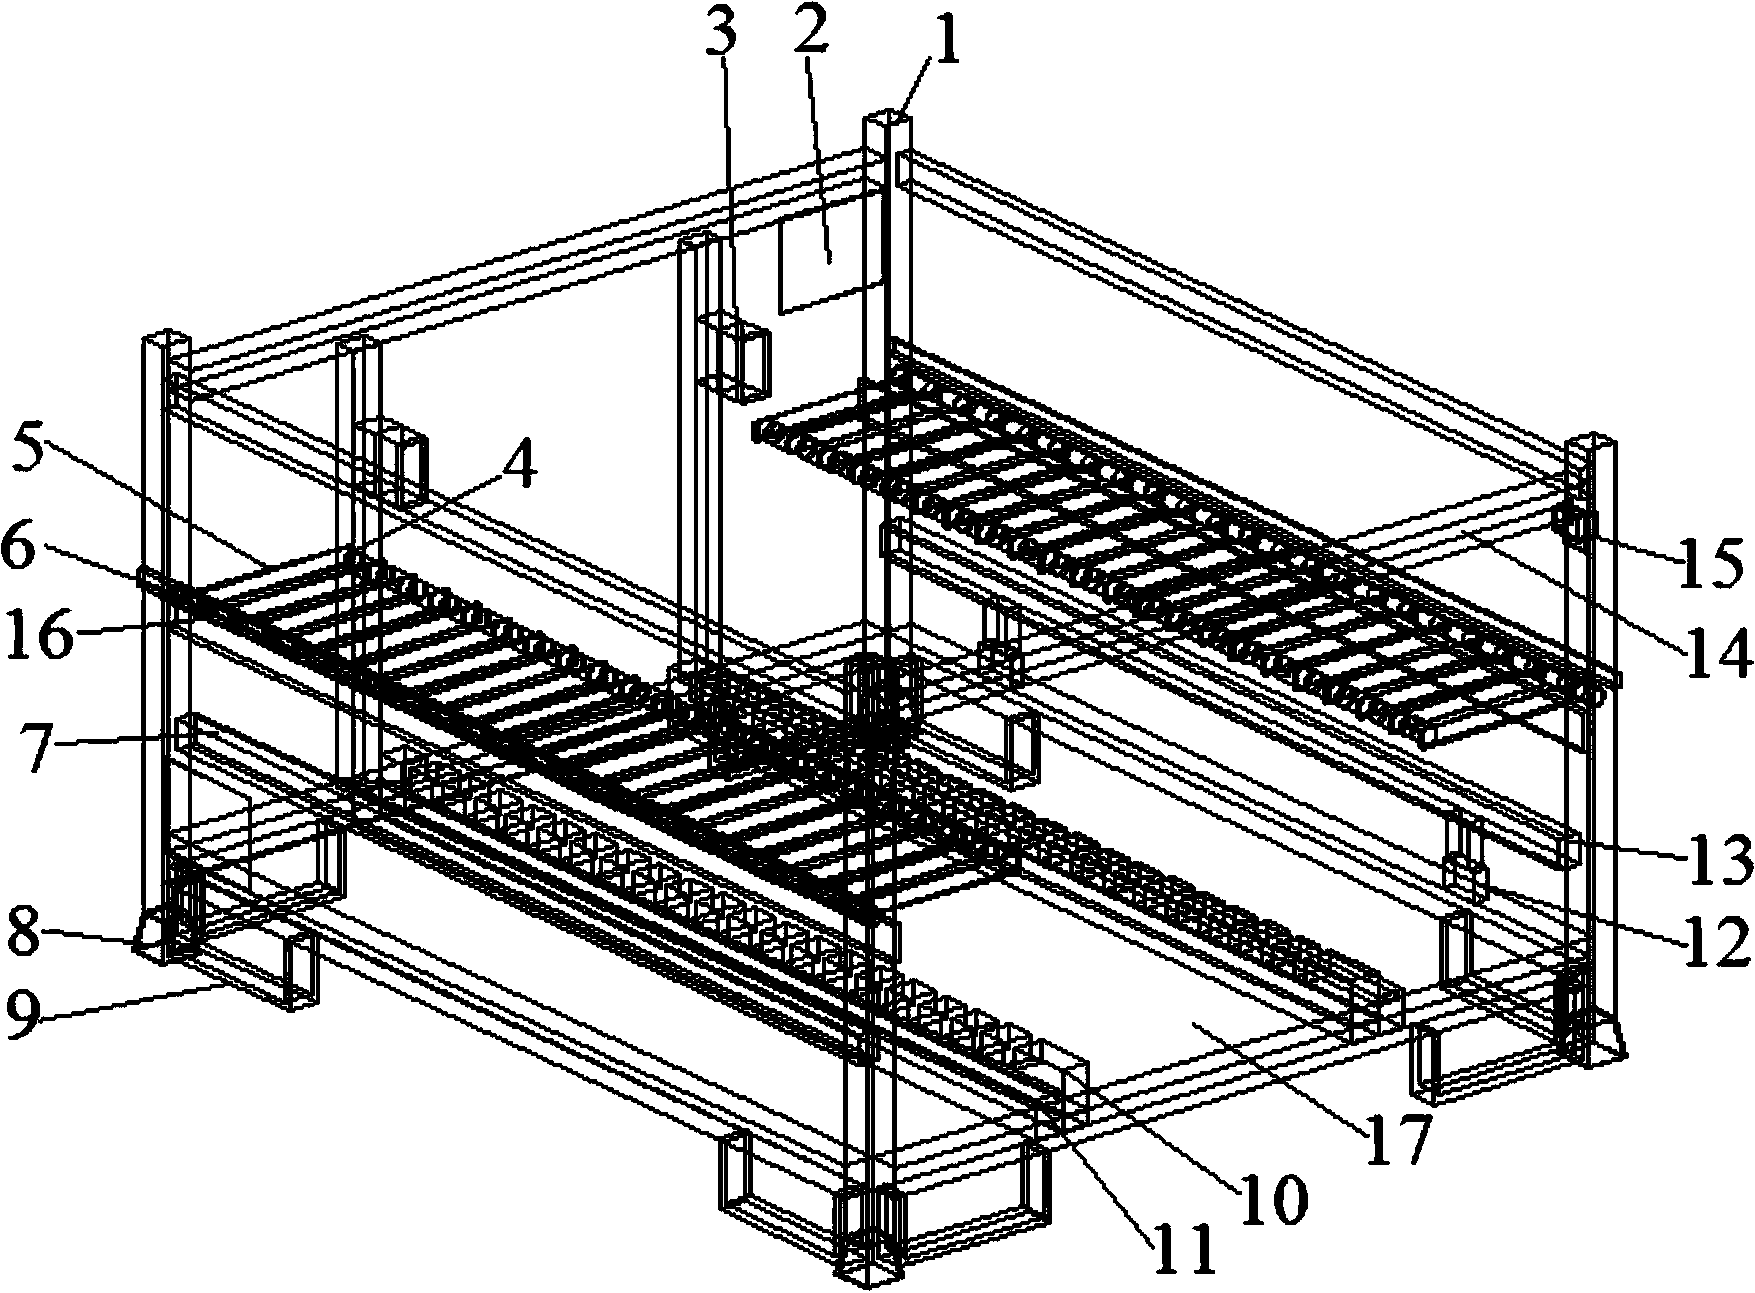 Device for packaging, transporting and fixing skylight glass